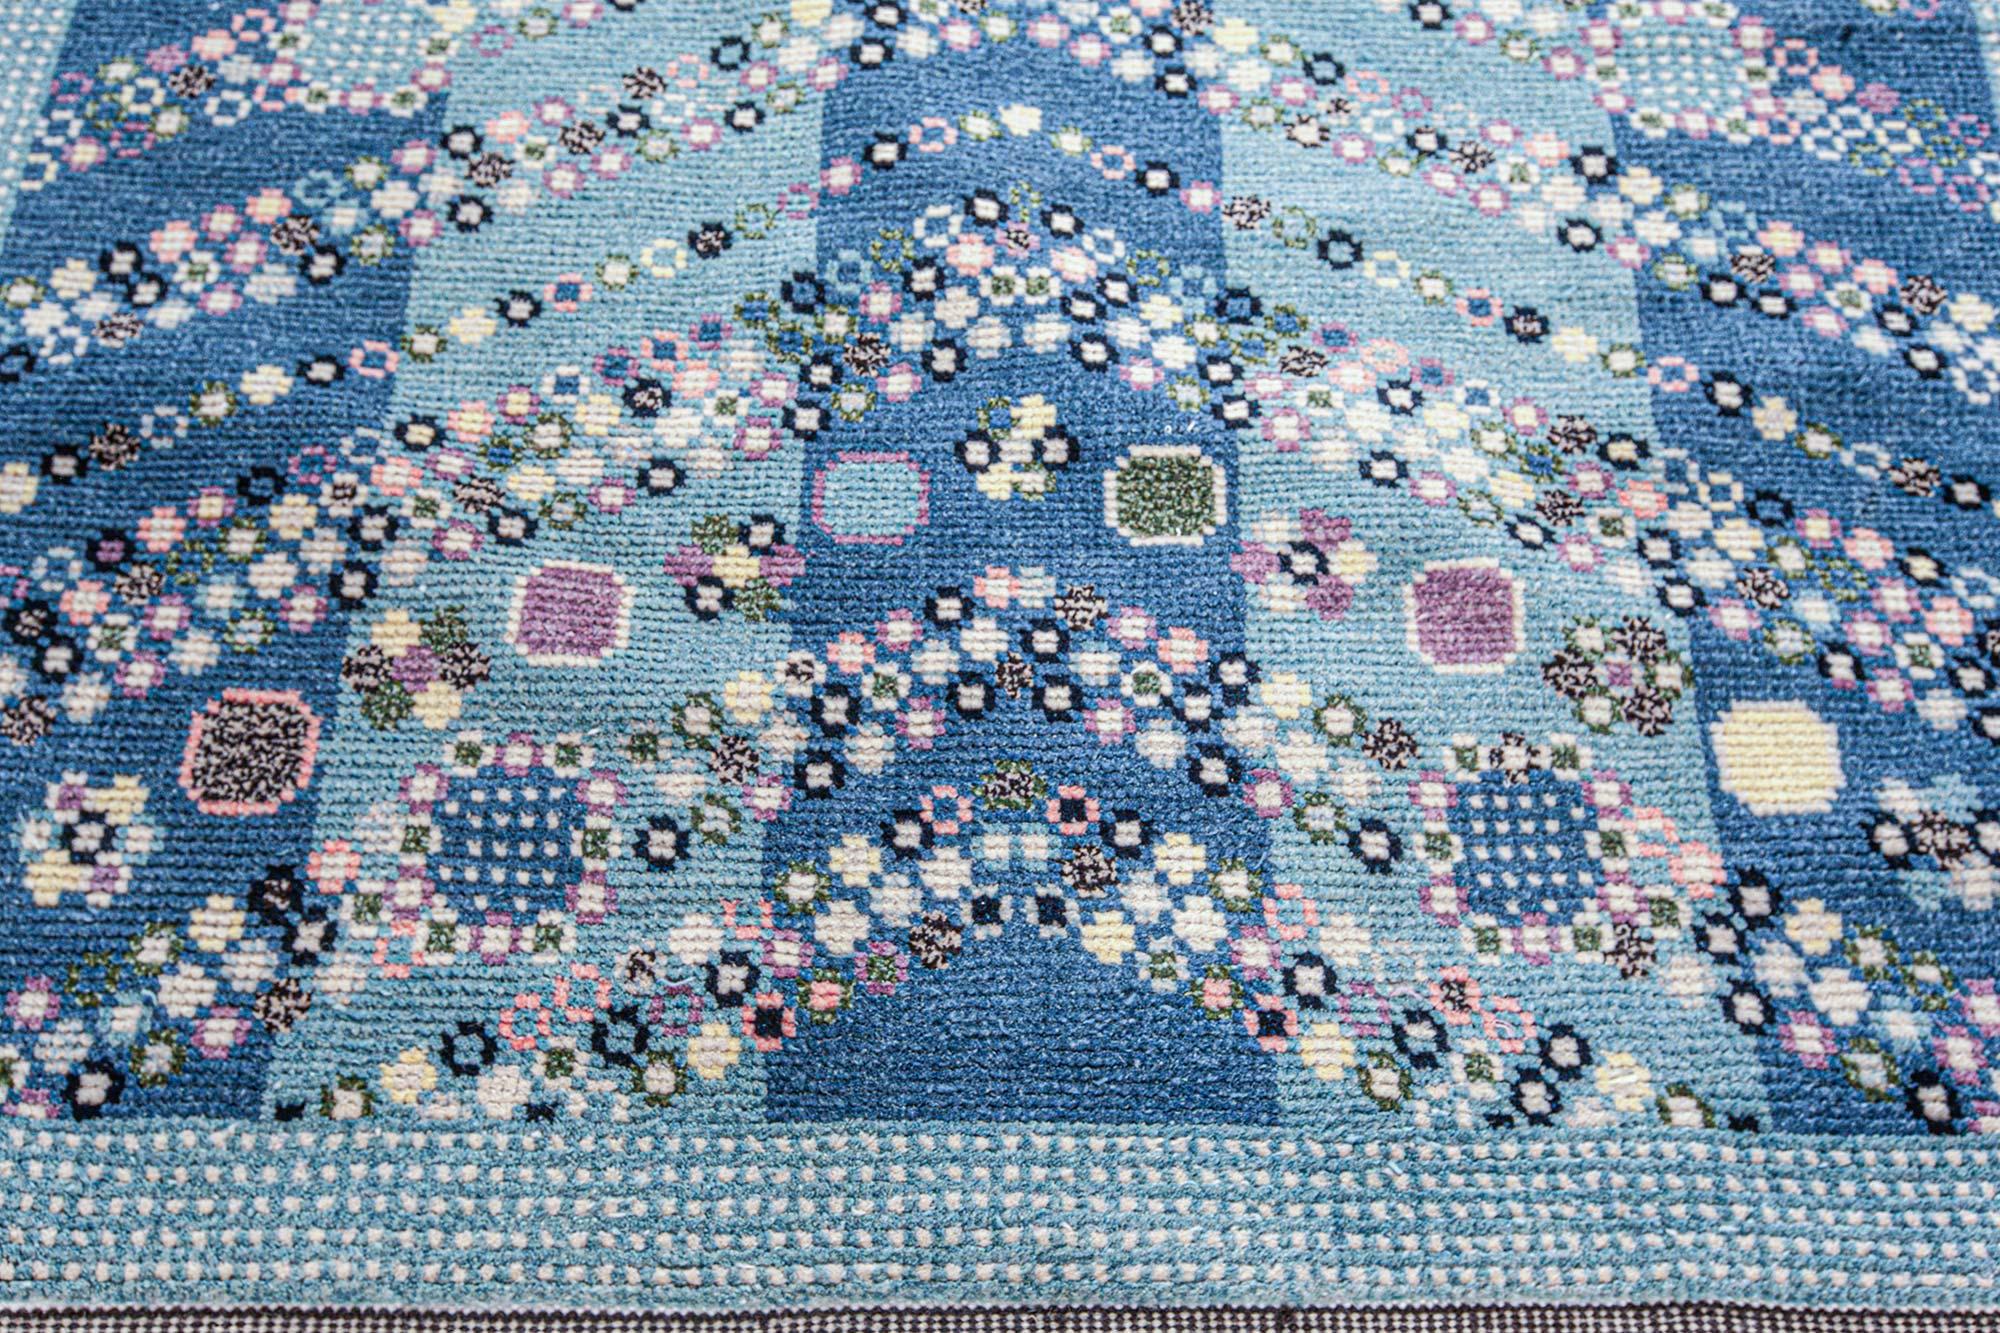 Hand-Knotted Swedish Rya Style Rug in Jewel Tones by Doris Leslie Blau For Sale